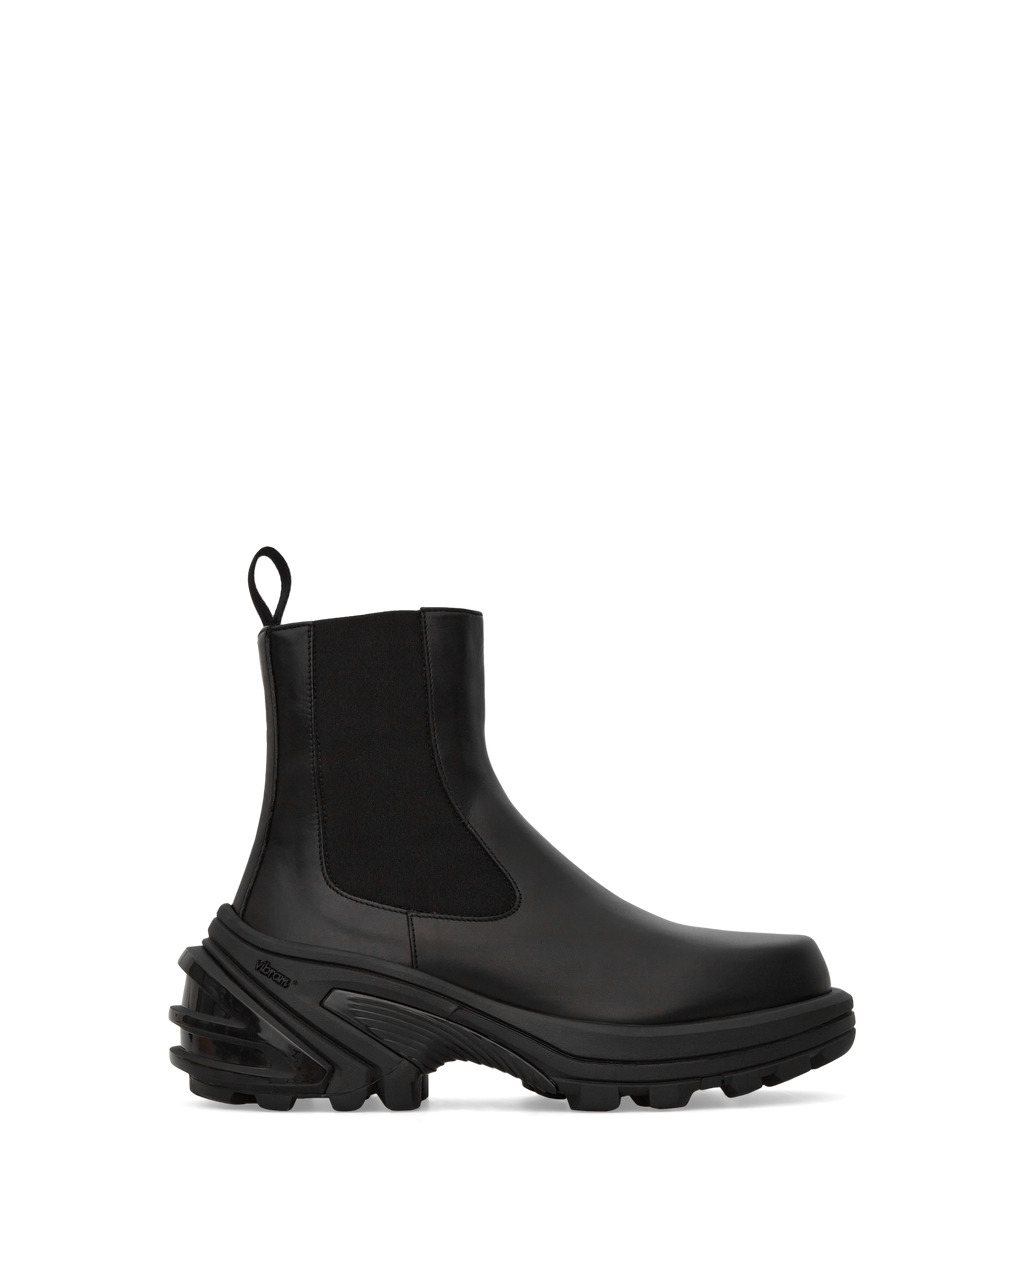 CHELSEA BOOT W/ REMOVABLE SKX SOLE - 1